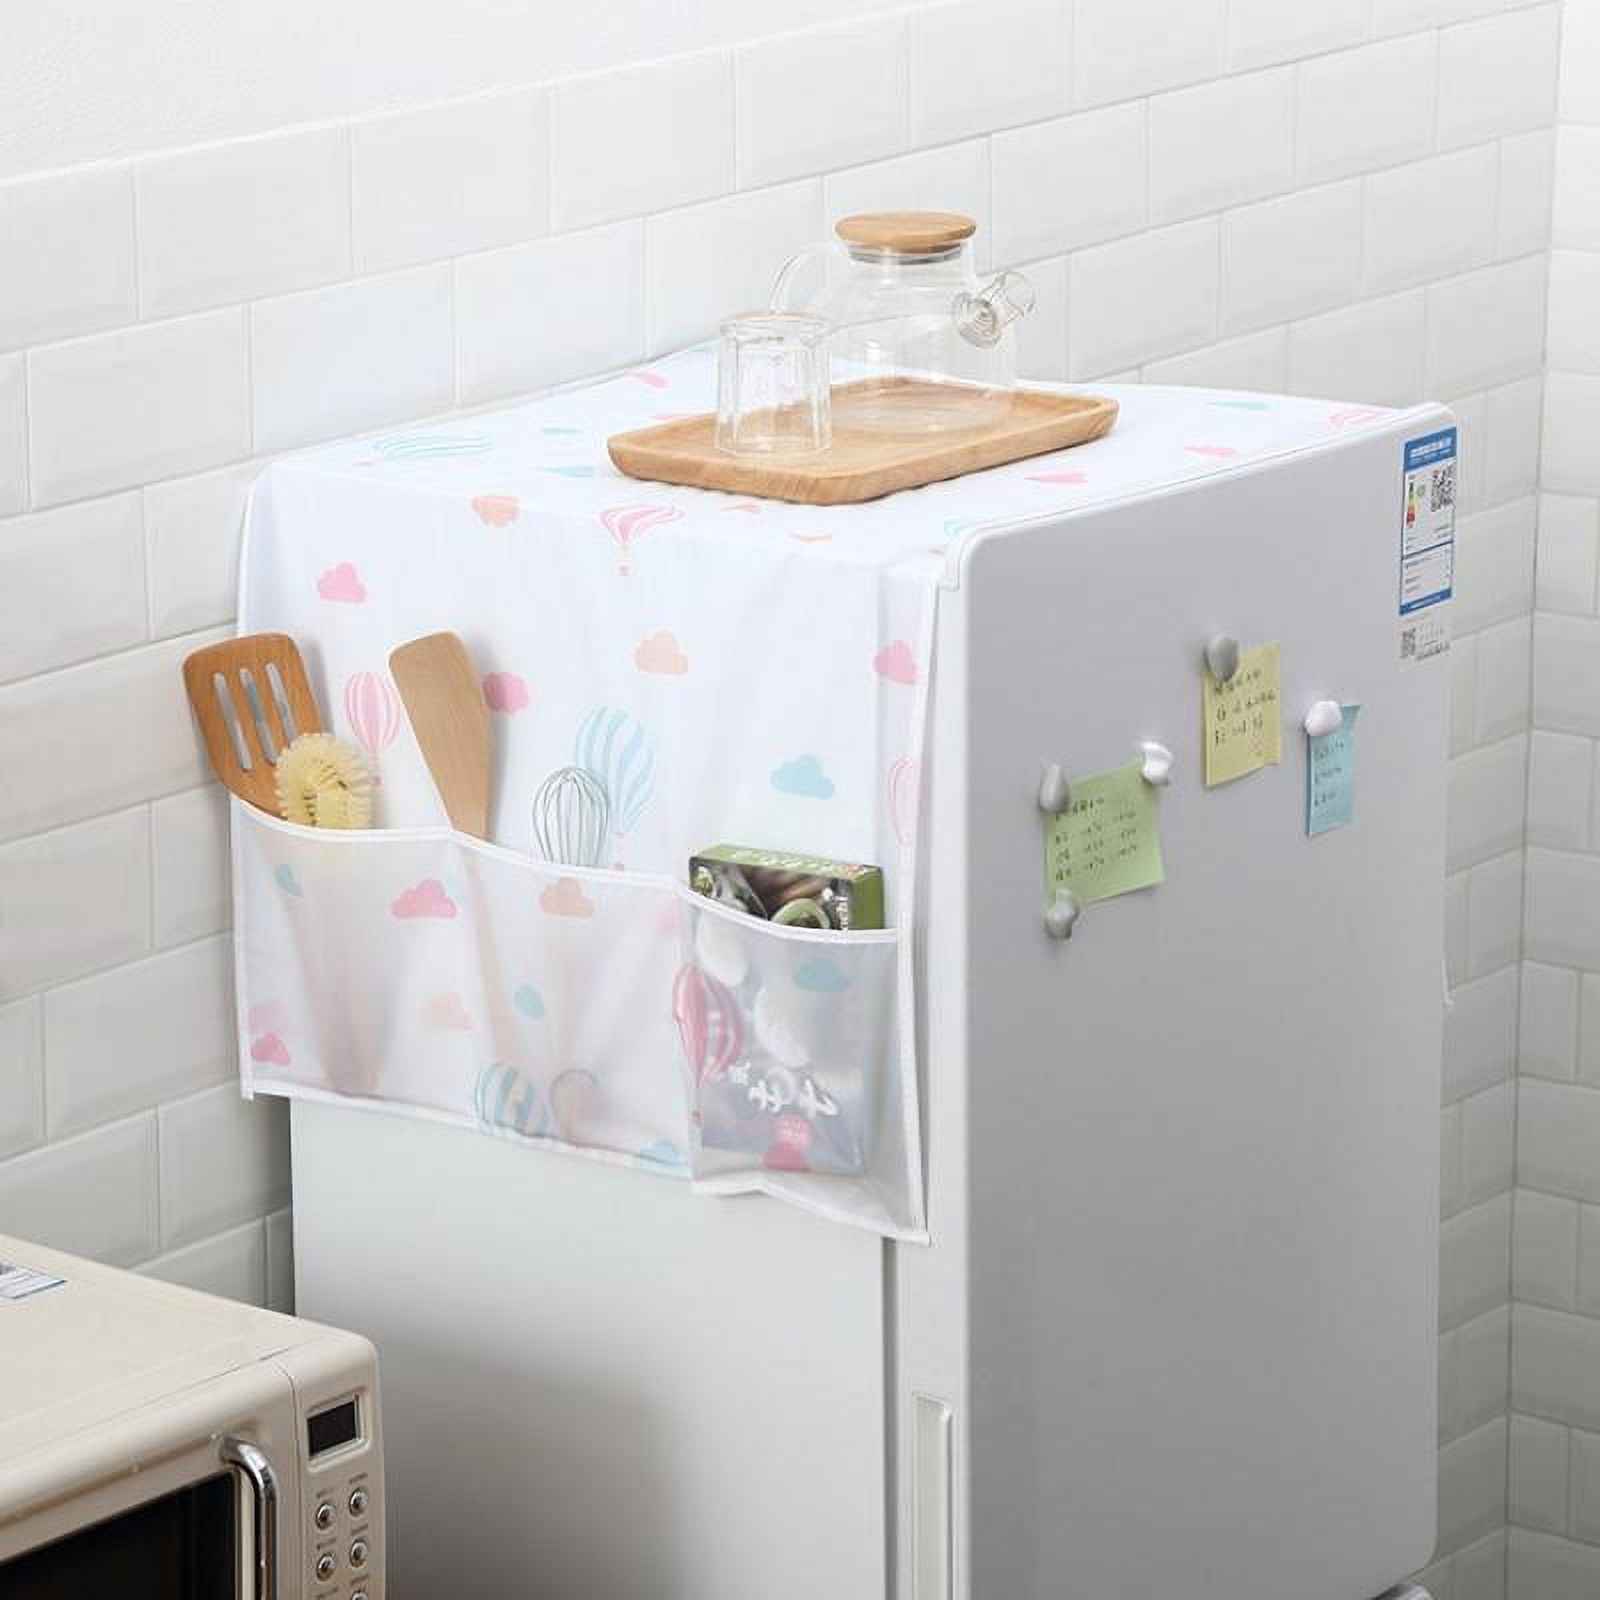 Dezapuby Dust-Proof Refrigerator Cover Cotton Washing Machine Top